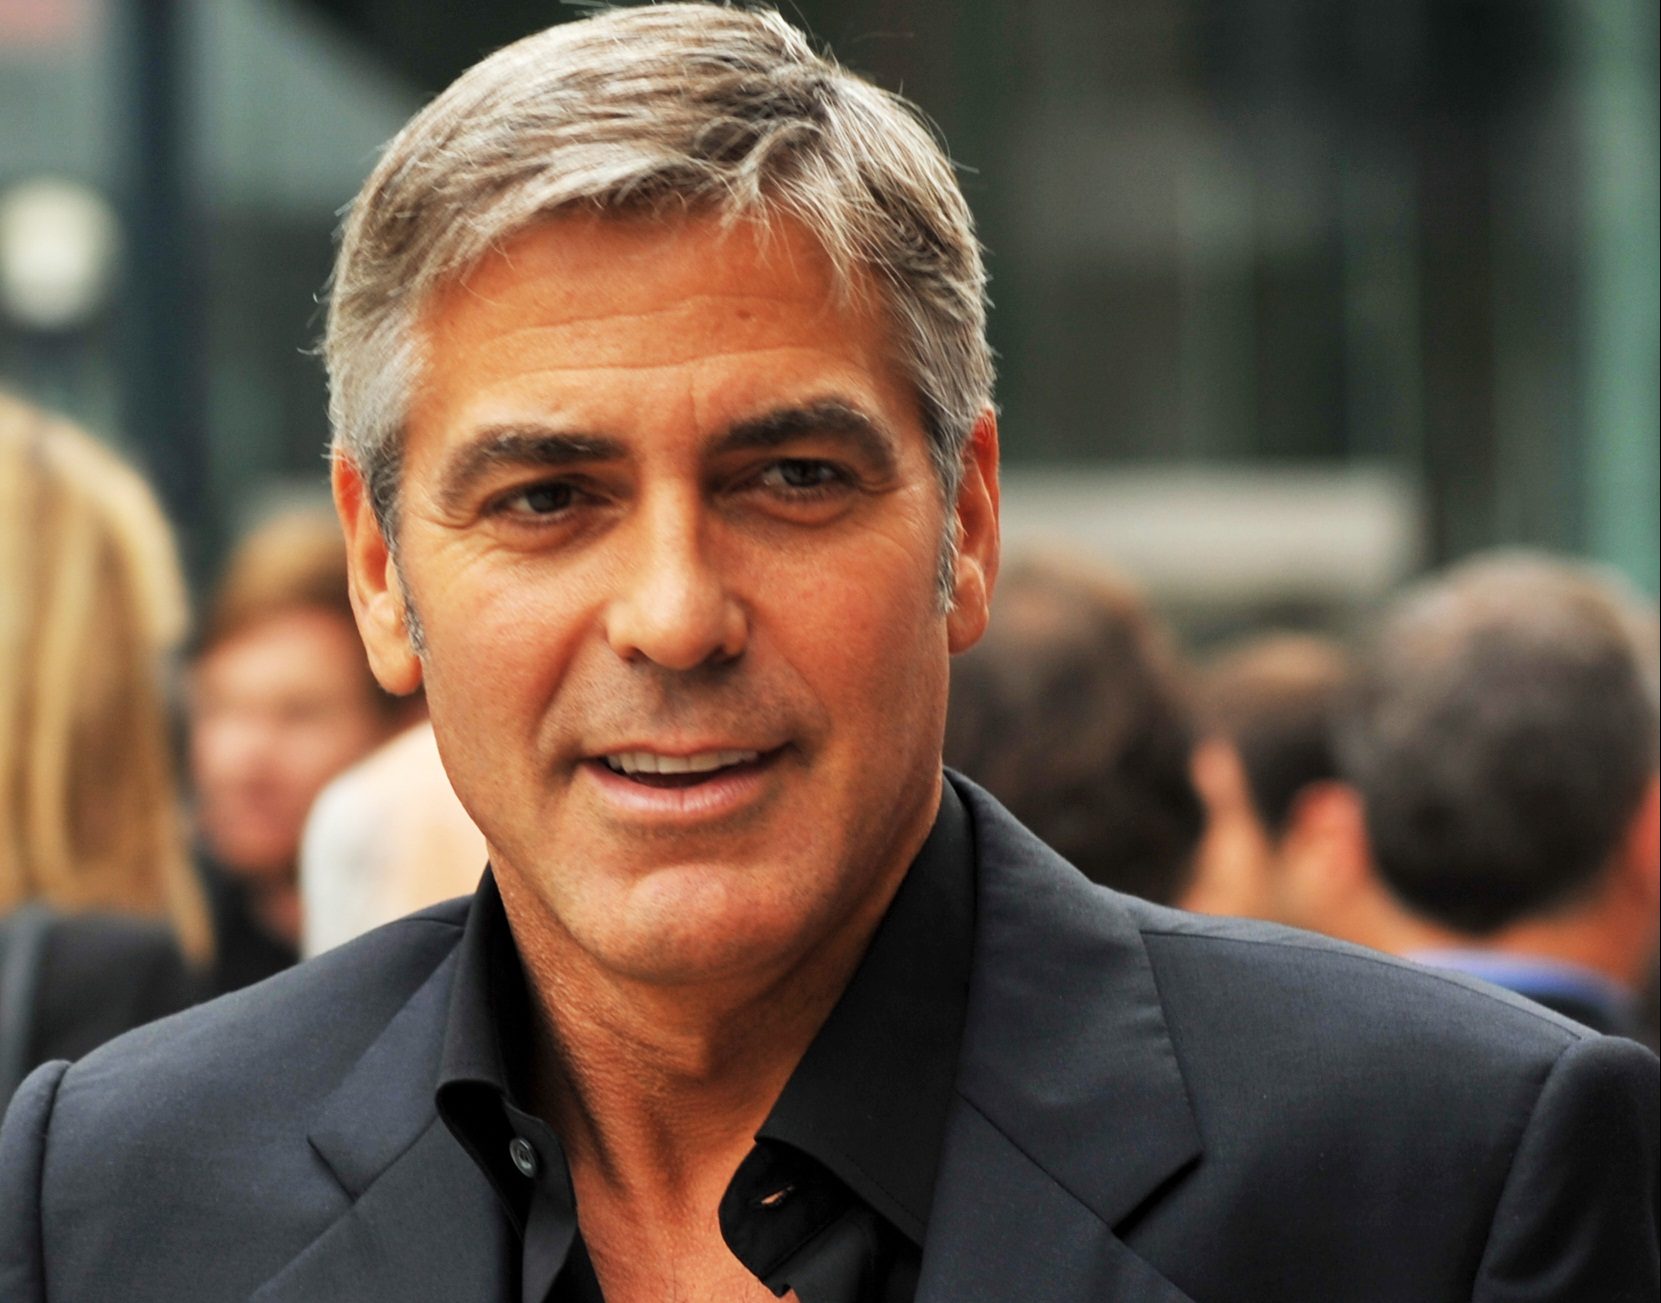 george_clooney-4_the_men_who_stare_at_goats_tiff09_cropped